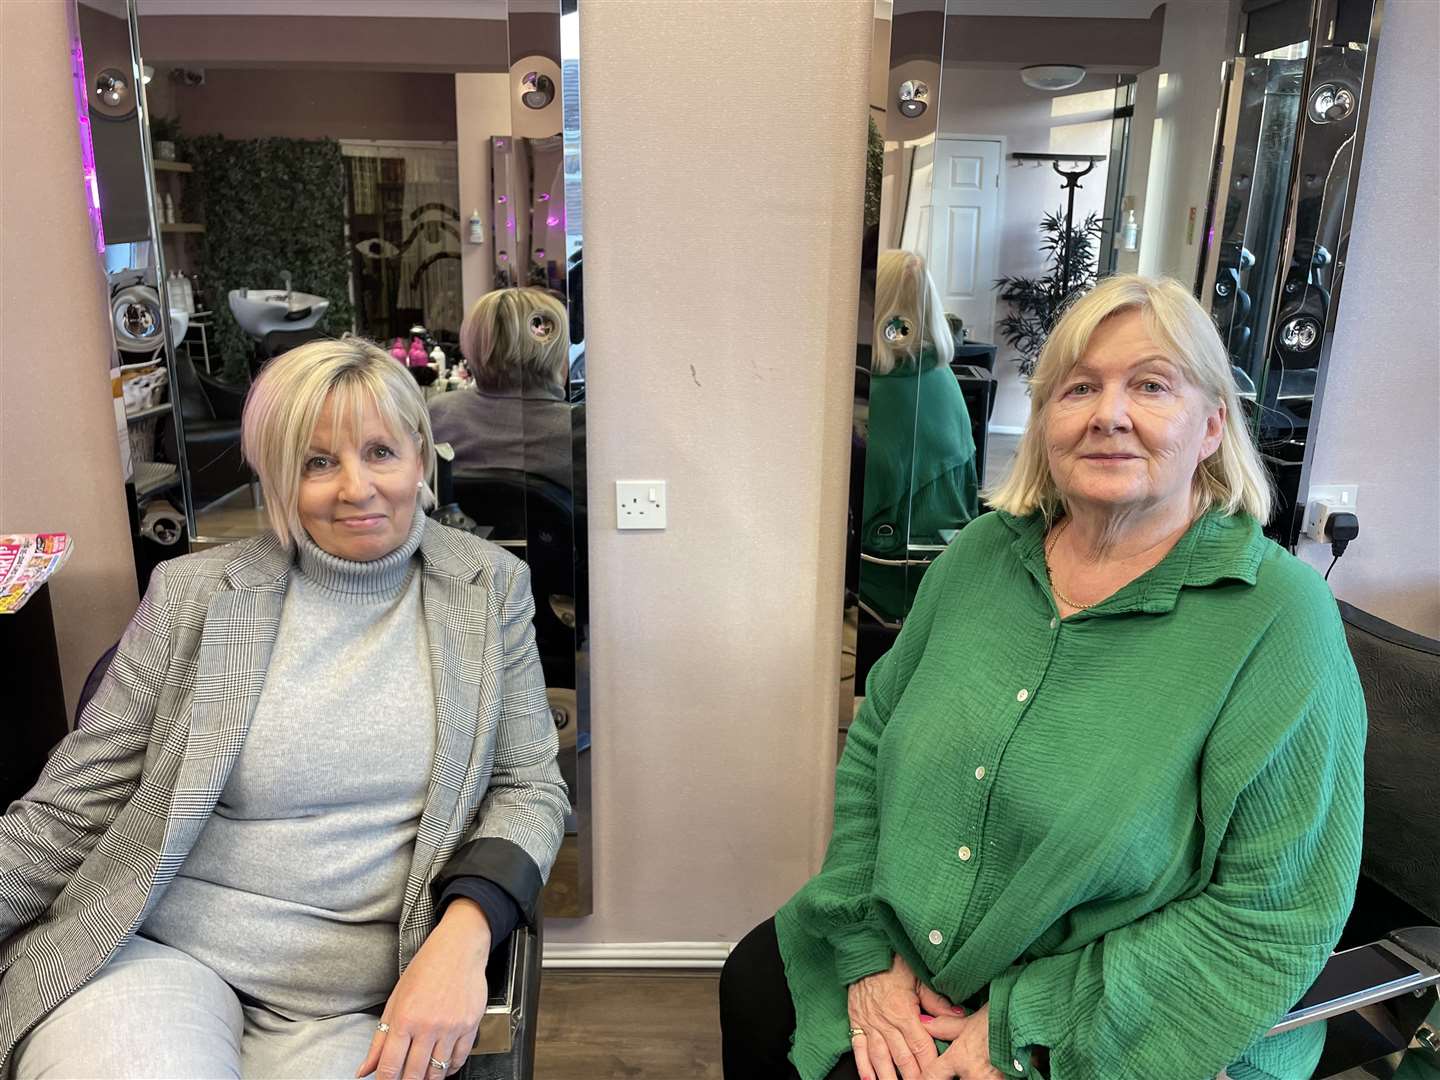 Irene (right) is retiring so has sold the hair salon to a dog grooming business